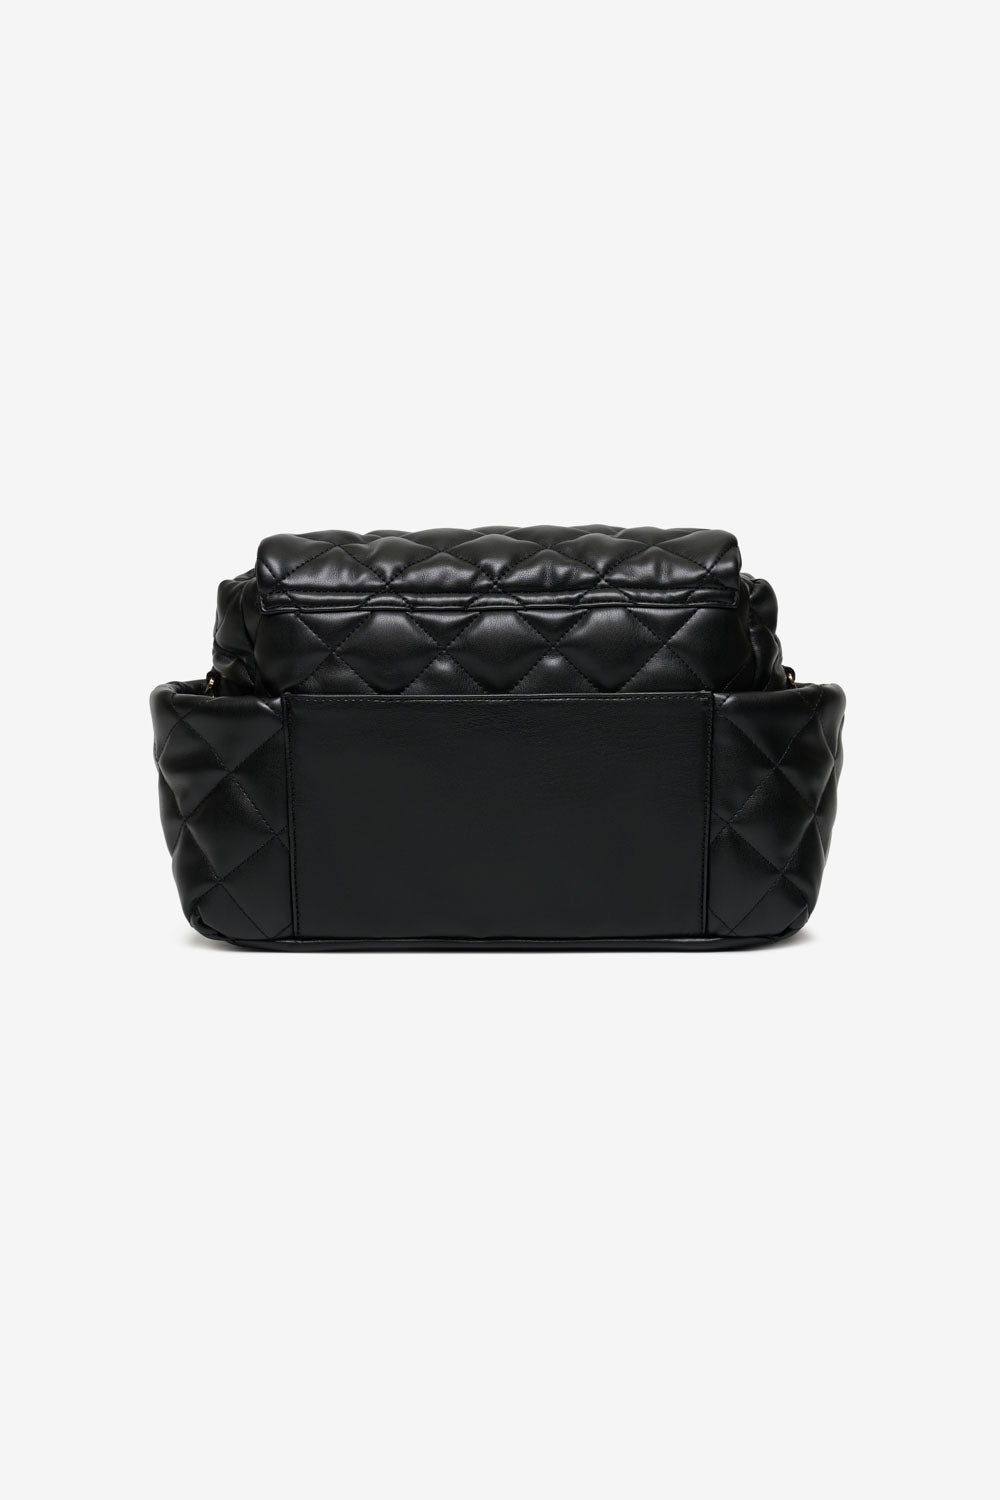 T+M x Selfridges Chain Nova Compact Changing Bag Black Quilted Faux Leather